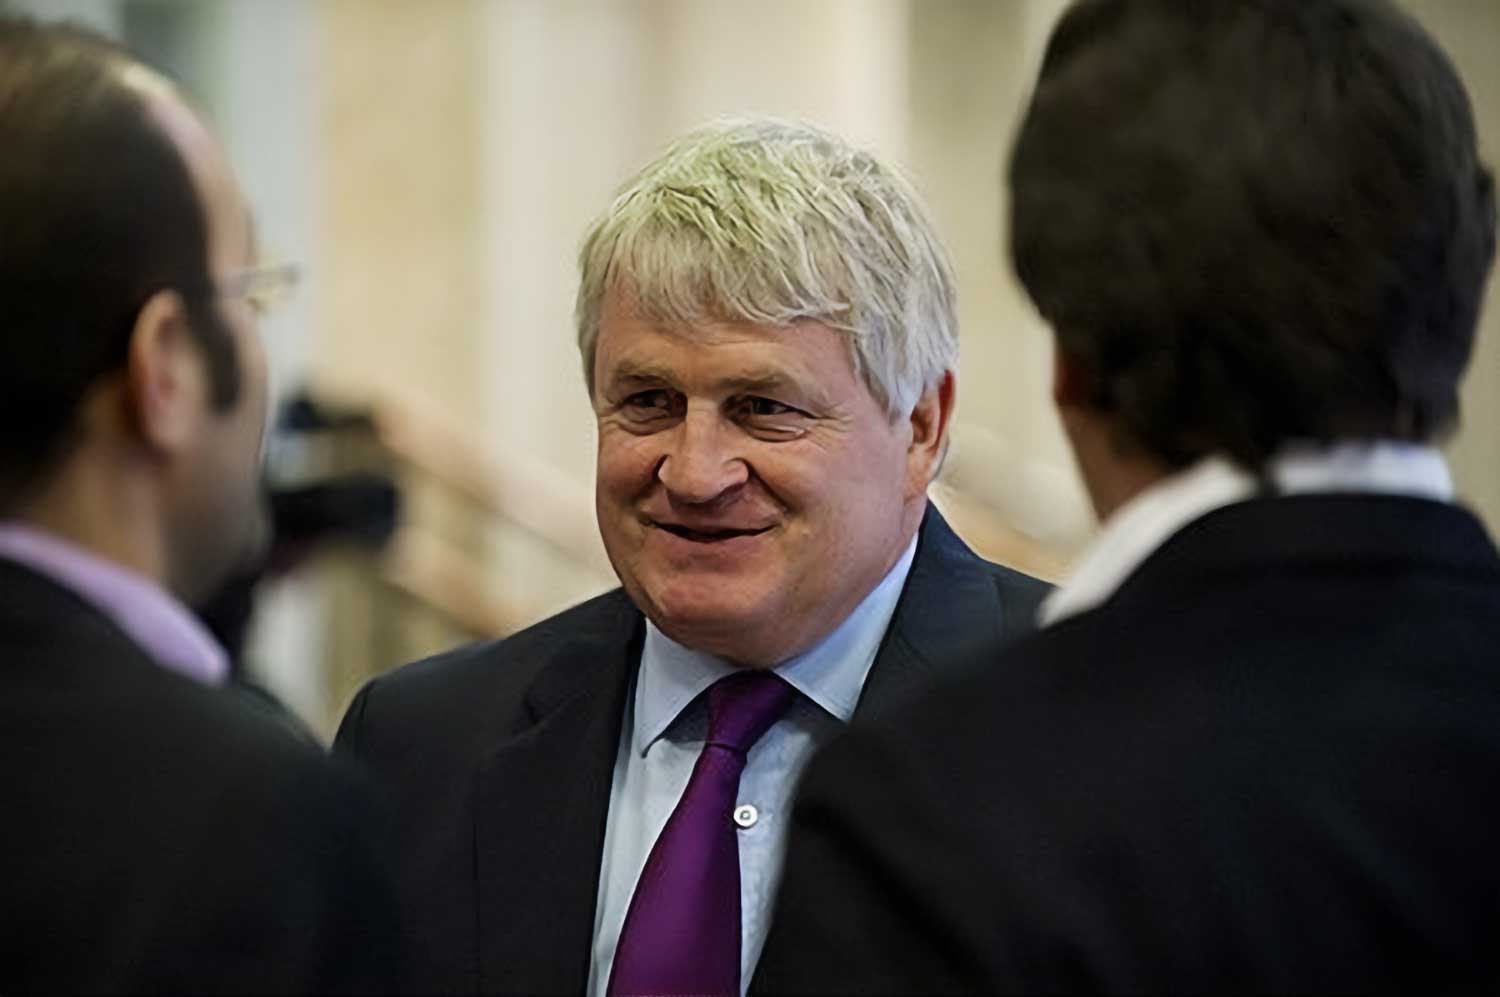 Digicel founding Chair and original sole owner, Denis O’Brien